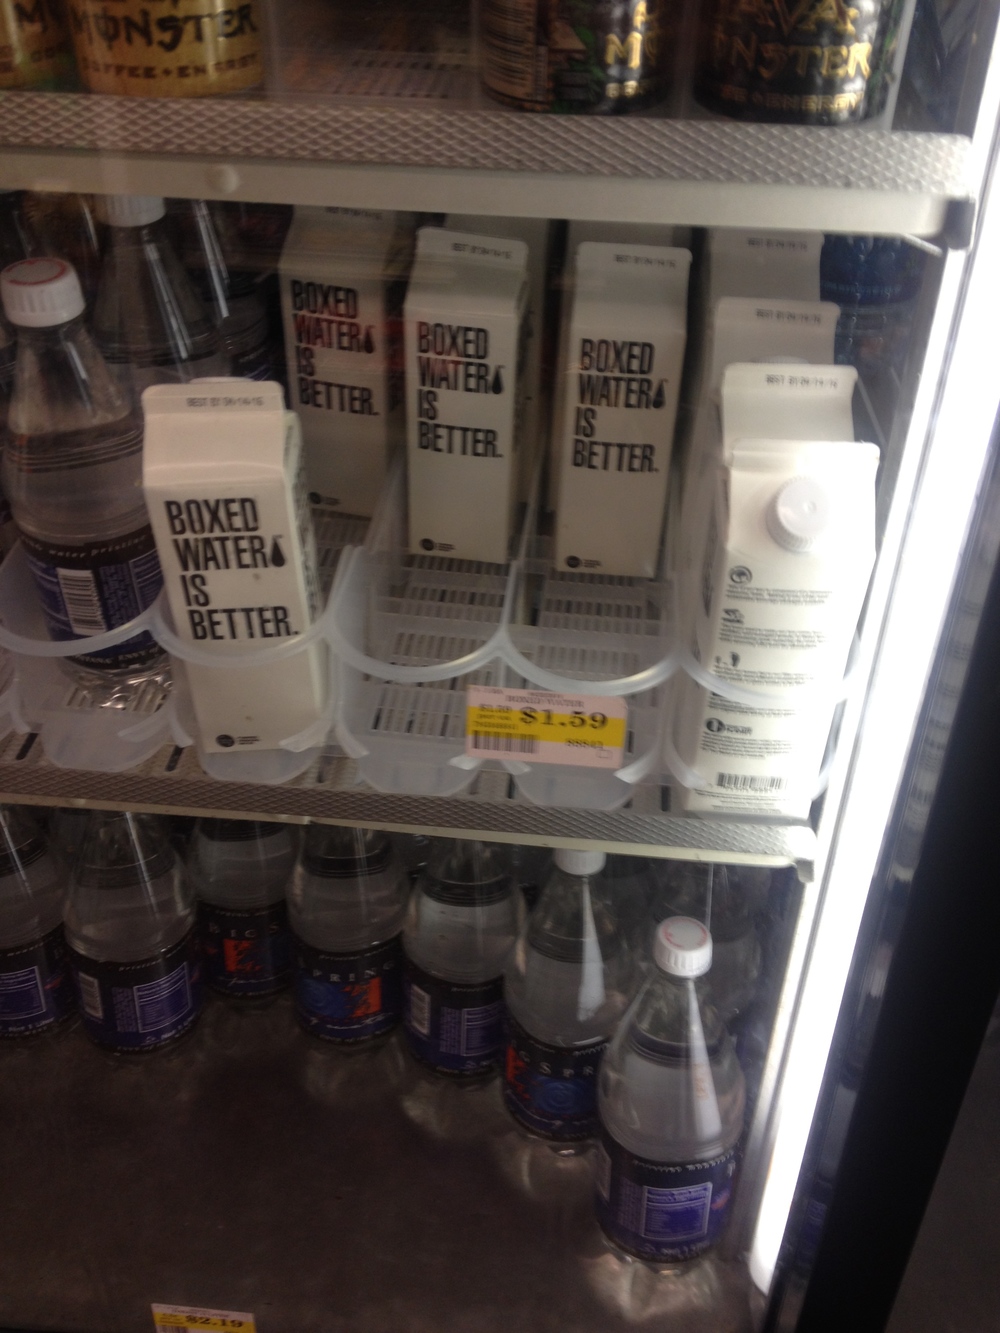  Have you ever heard of boxed water? 